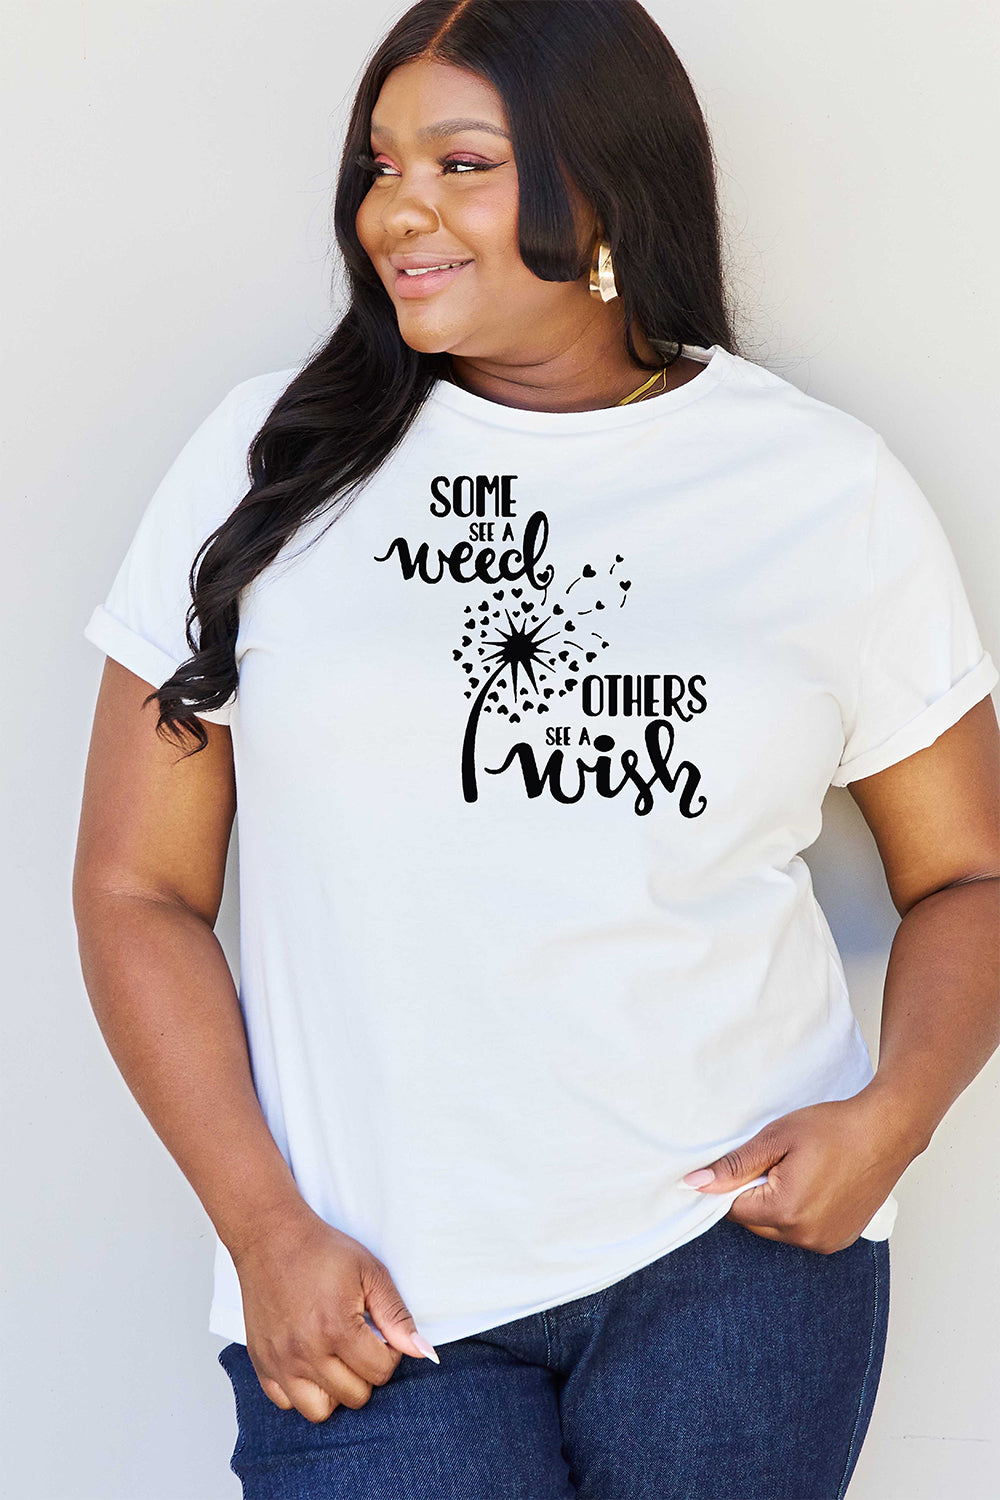 Simply Love Full Size Dandelion Graphic T-Shirt Additional Options Available